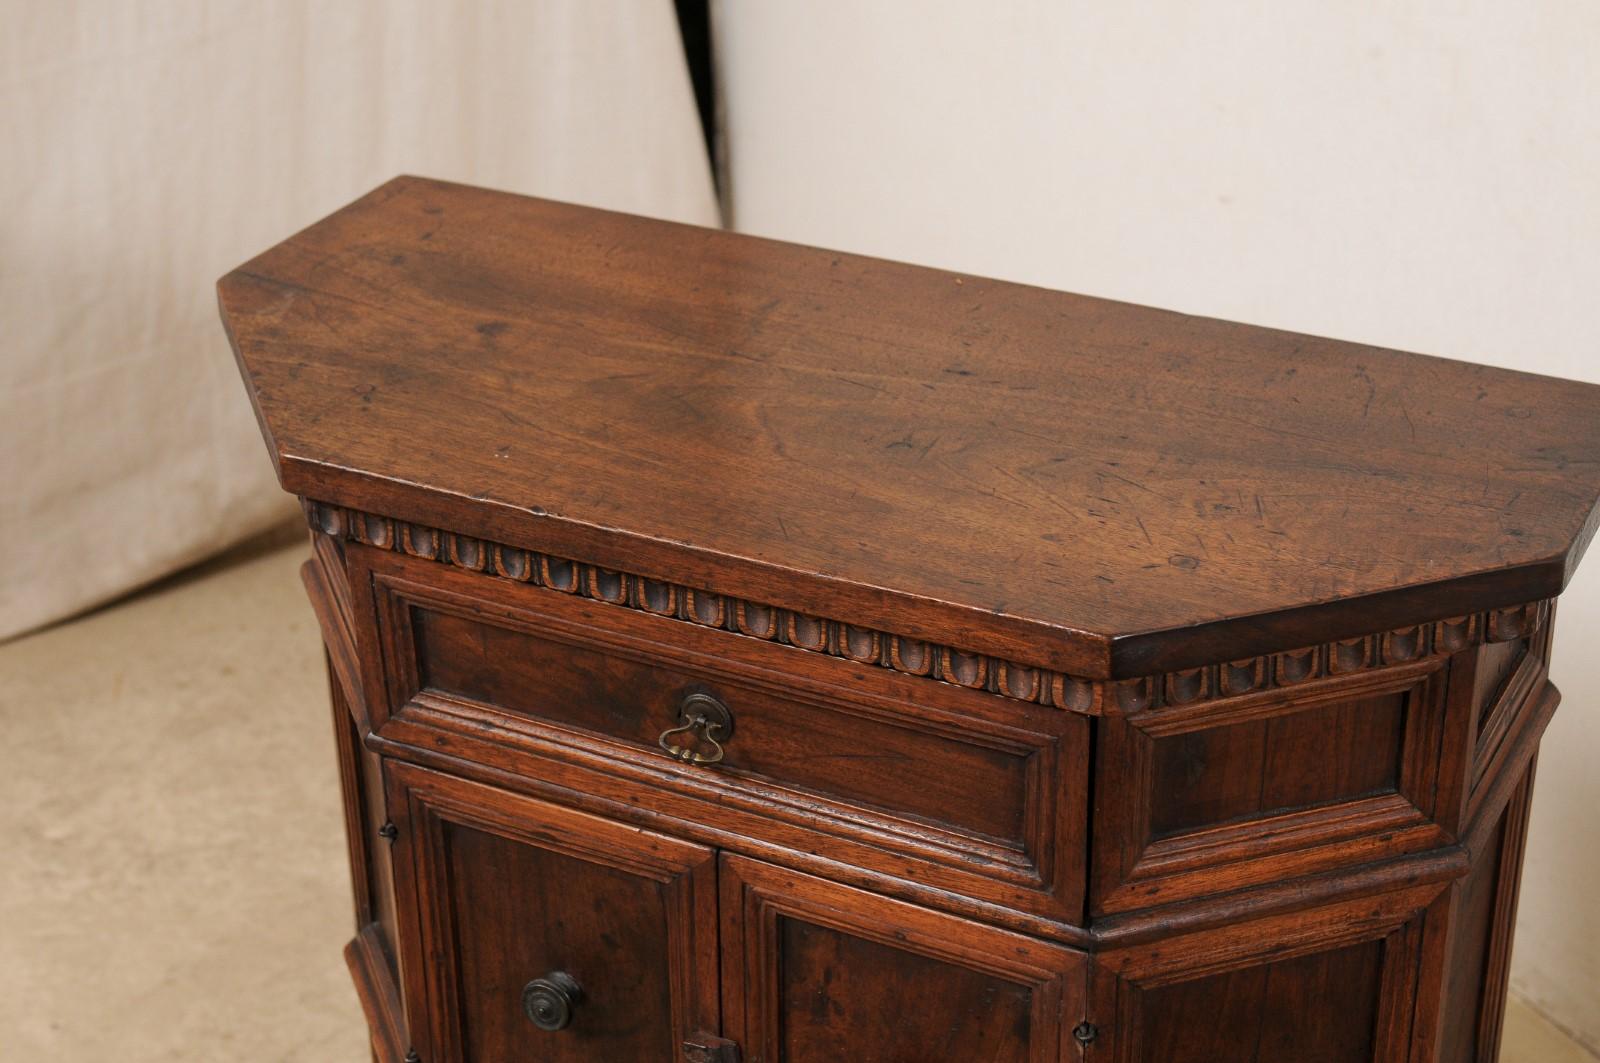 Italian Petite-Sized Paneled & Carved Console Cabinets, Early 19th Century 5